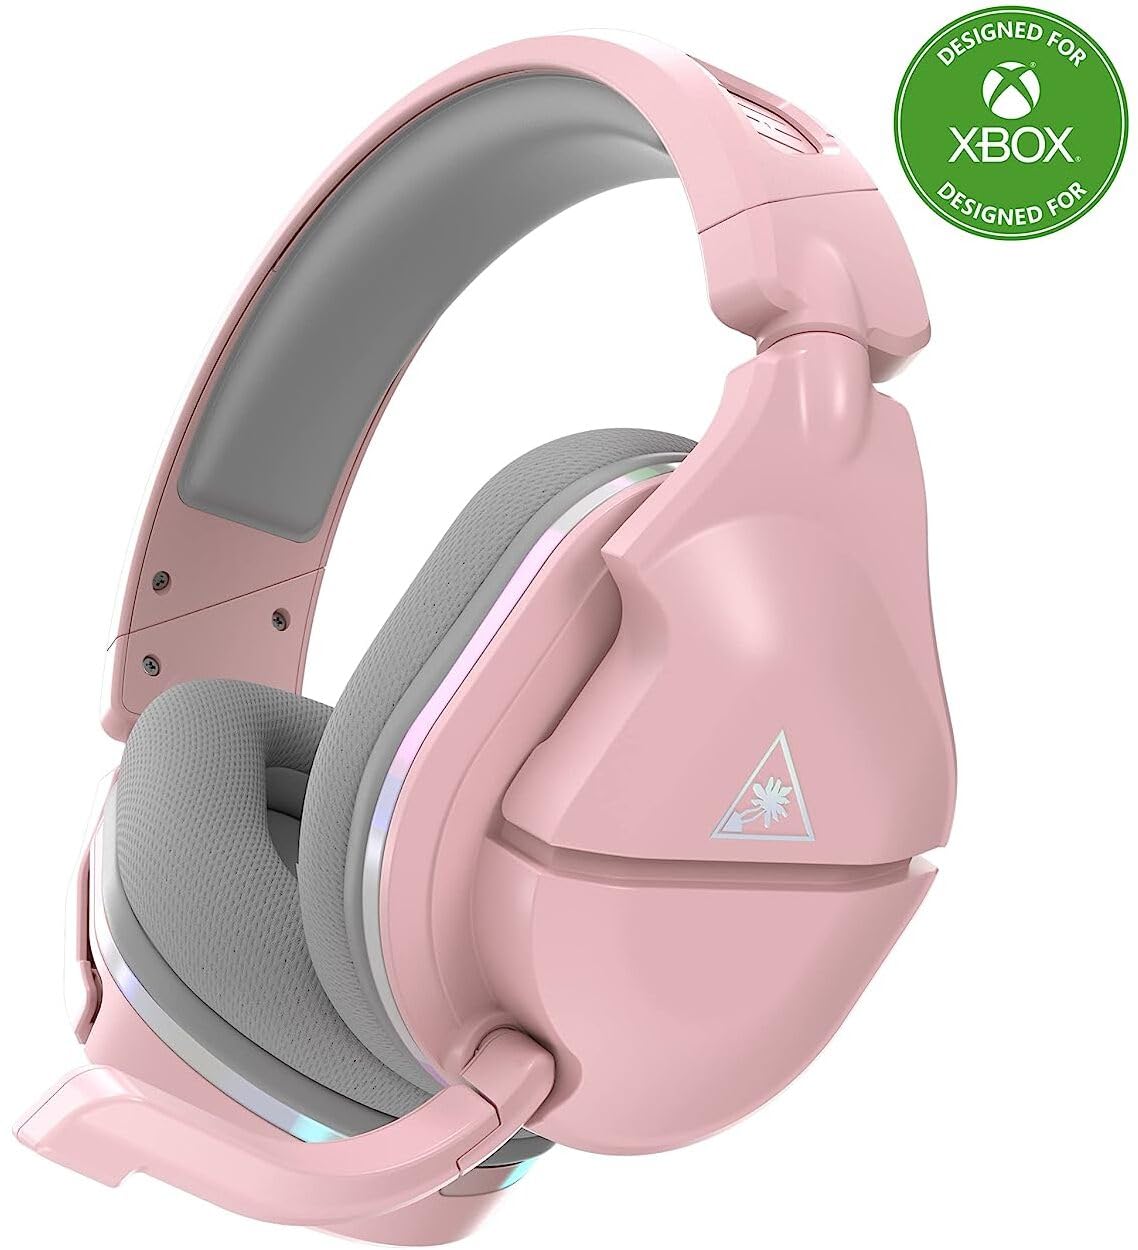 Turtle Beach Stealth 600 Gen 2 MAX Wireless Multiplatform Amplified Gaming Headset for Xbox Series X|S, Xbox One, PS5, PS4, Nintendo Switch, PC, and Mac with 48+ Hour Battery – Pink